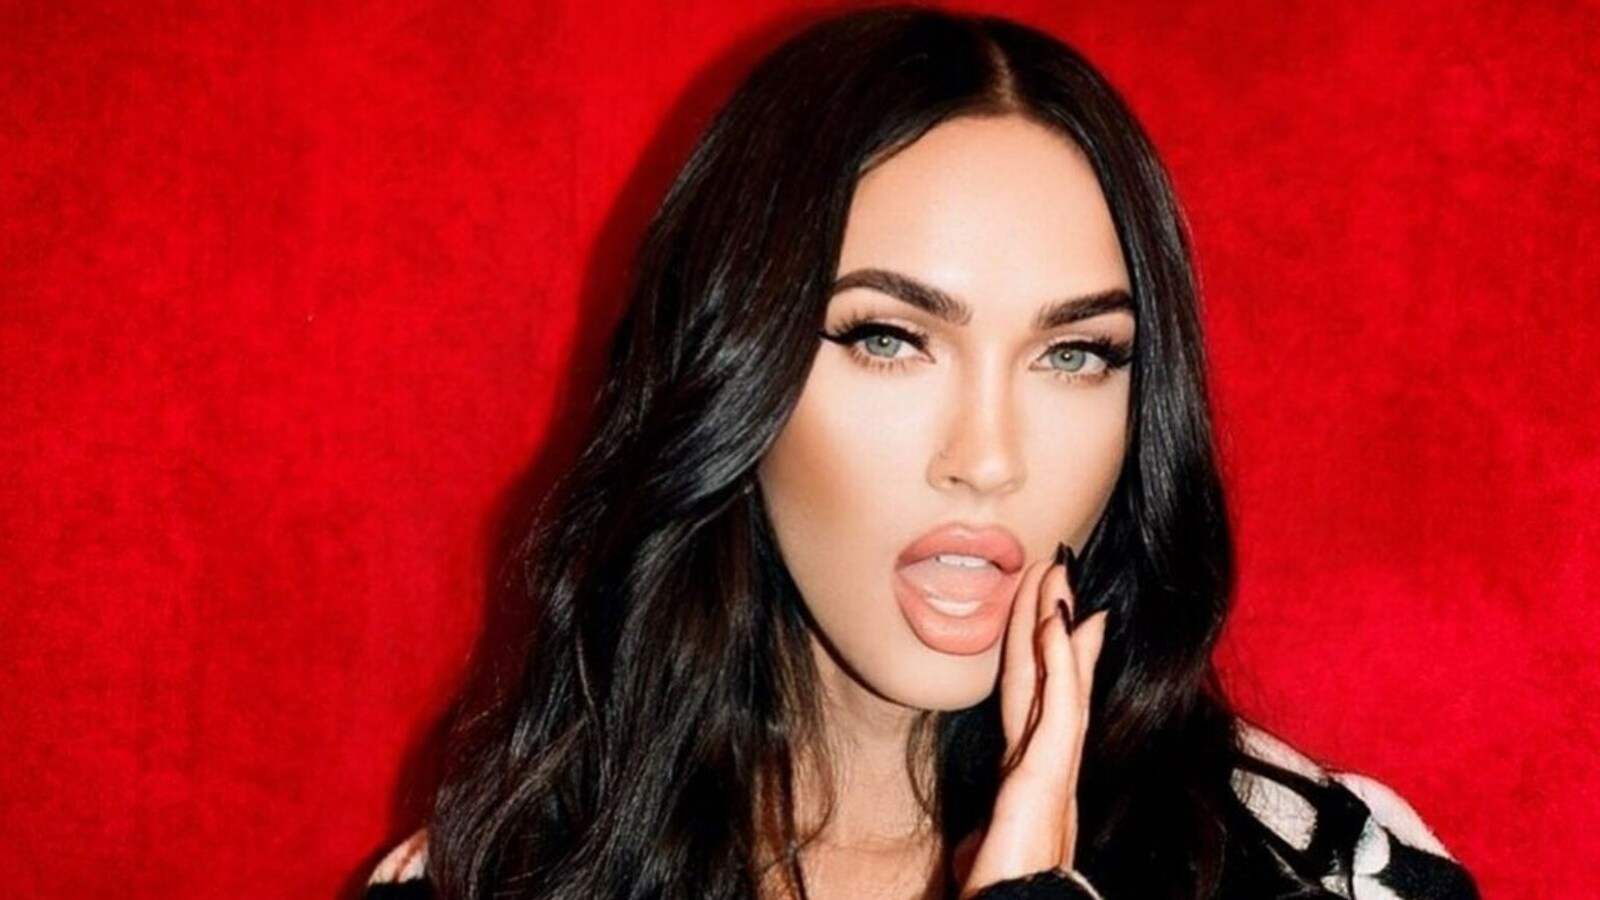 Five times Megan Fox created a storm with her controversies: From calling Michael Bay ‘Hitler’ to shoplifting at Walmart